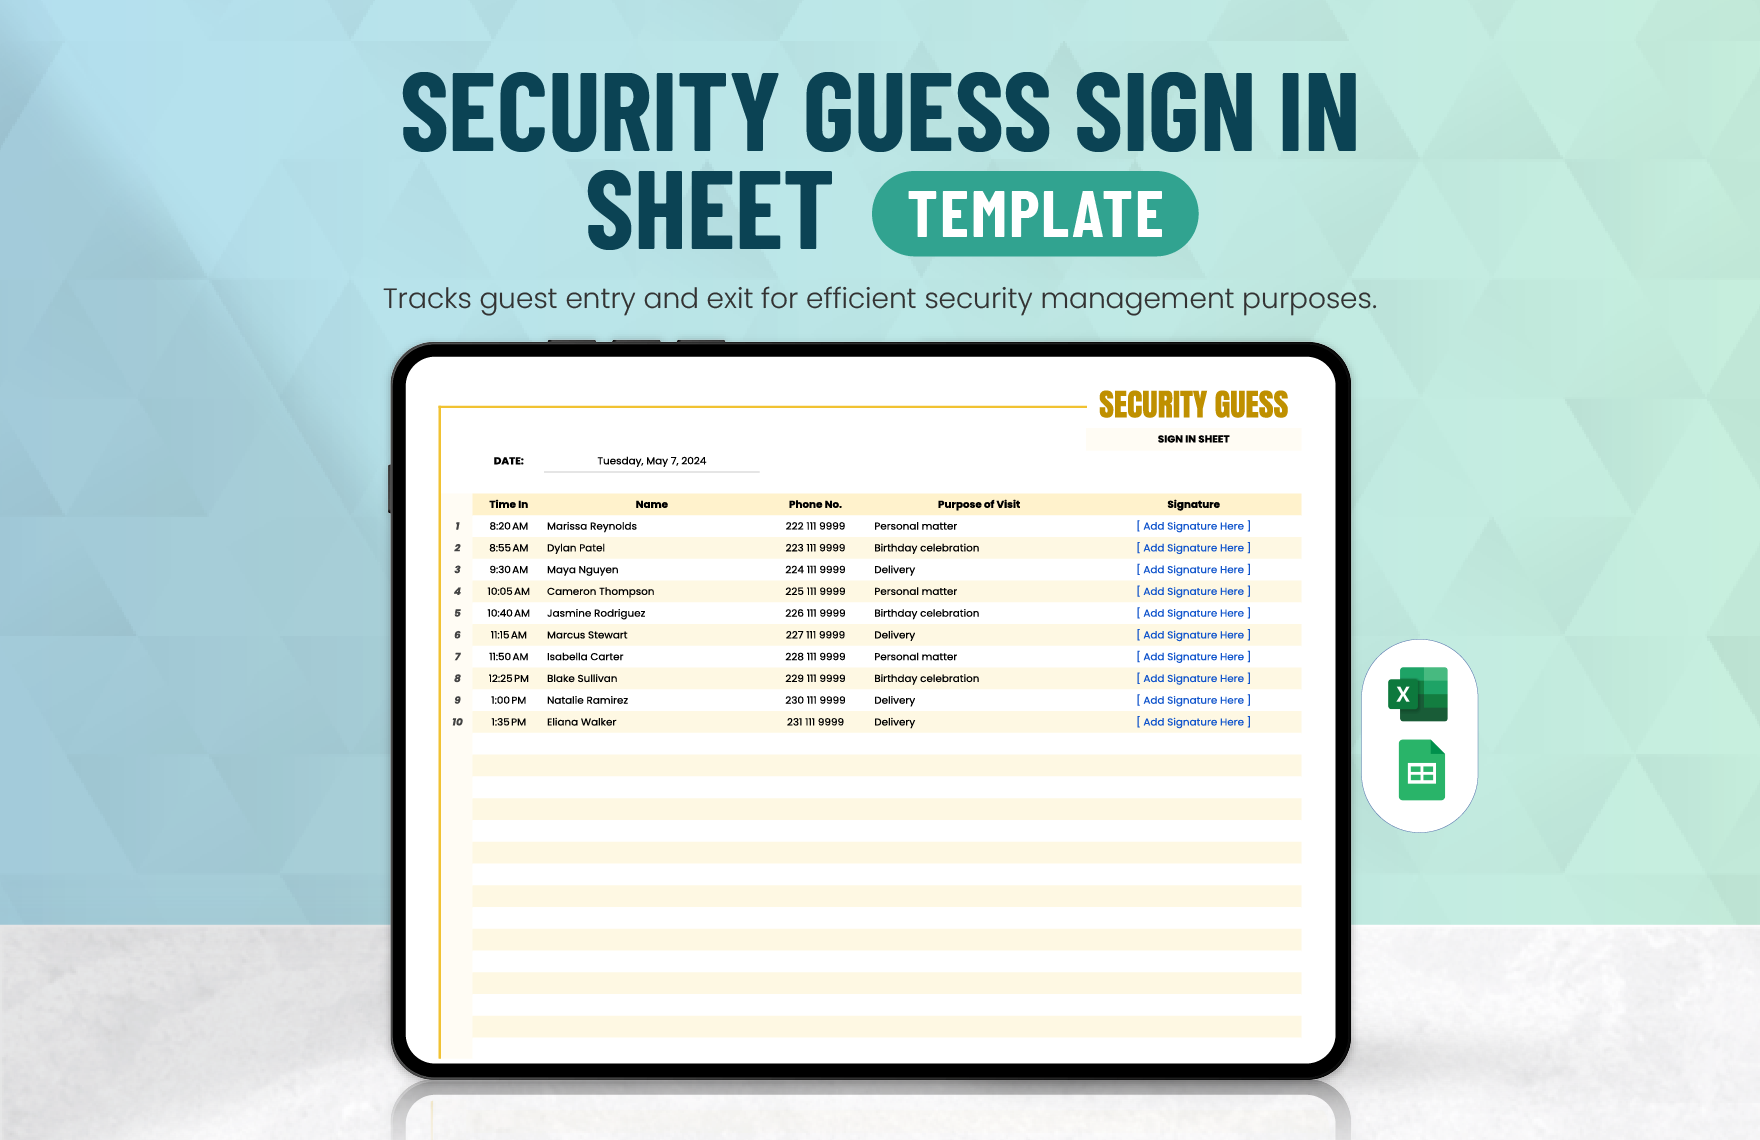 Free Security Guess Sign in Sheet Template in Excel, Google Sheets